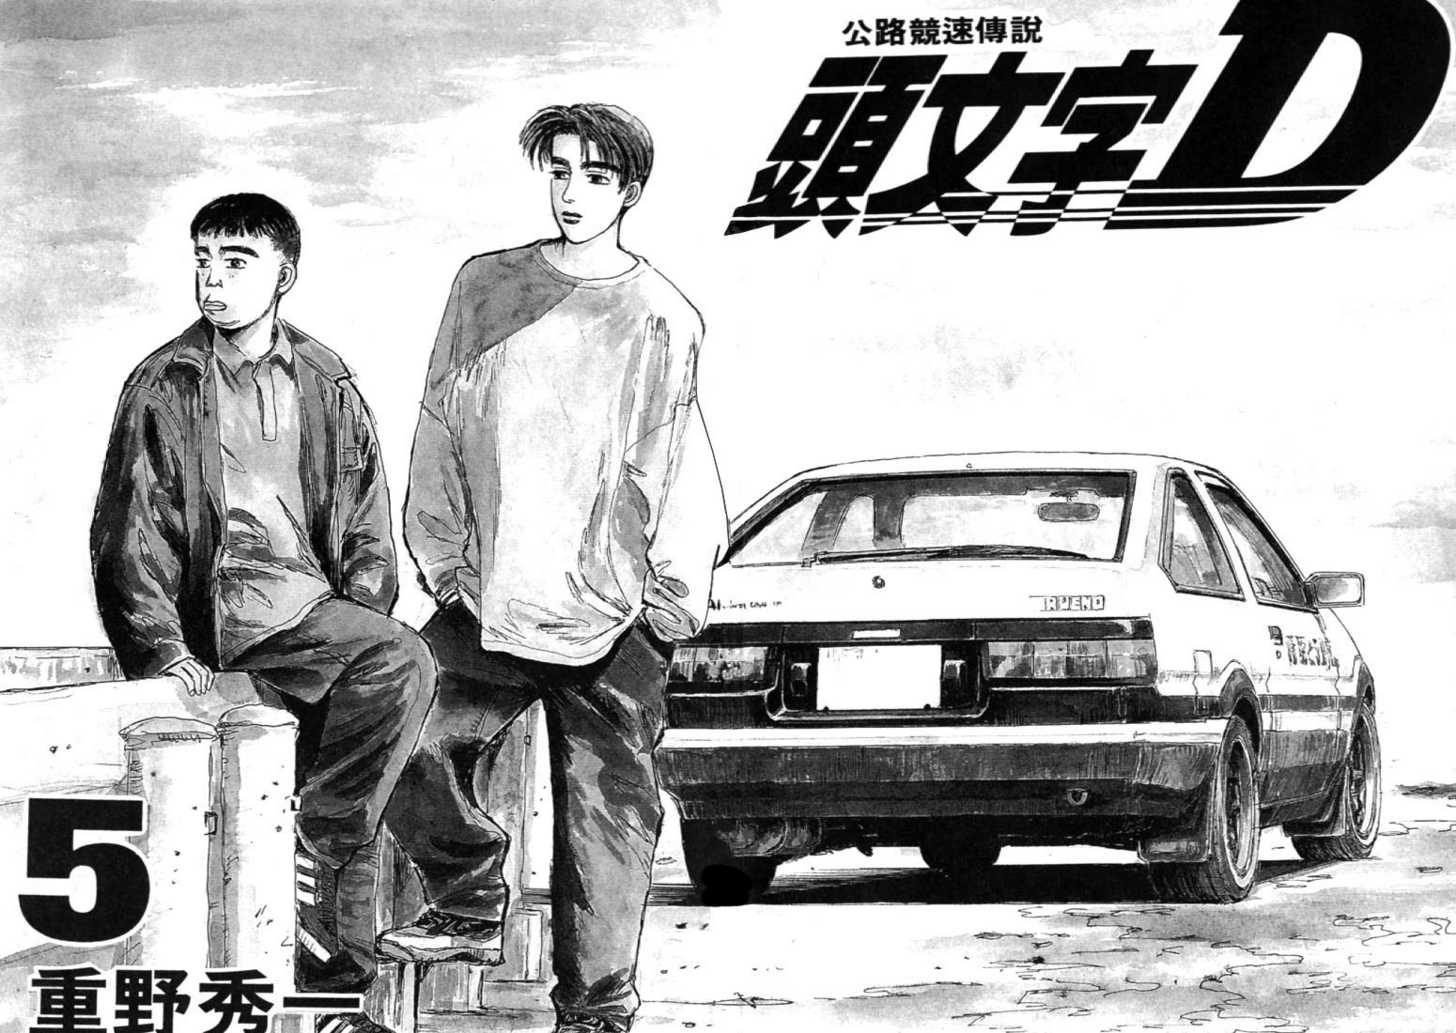 Initial D's beloved characters: “Where are they now?” according to MF Ghost